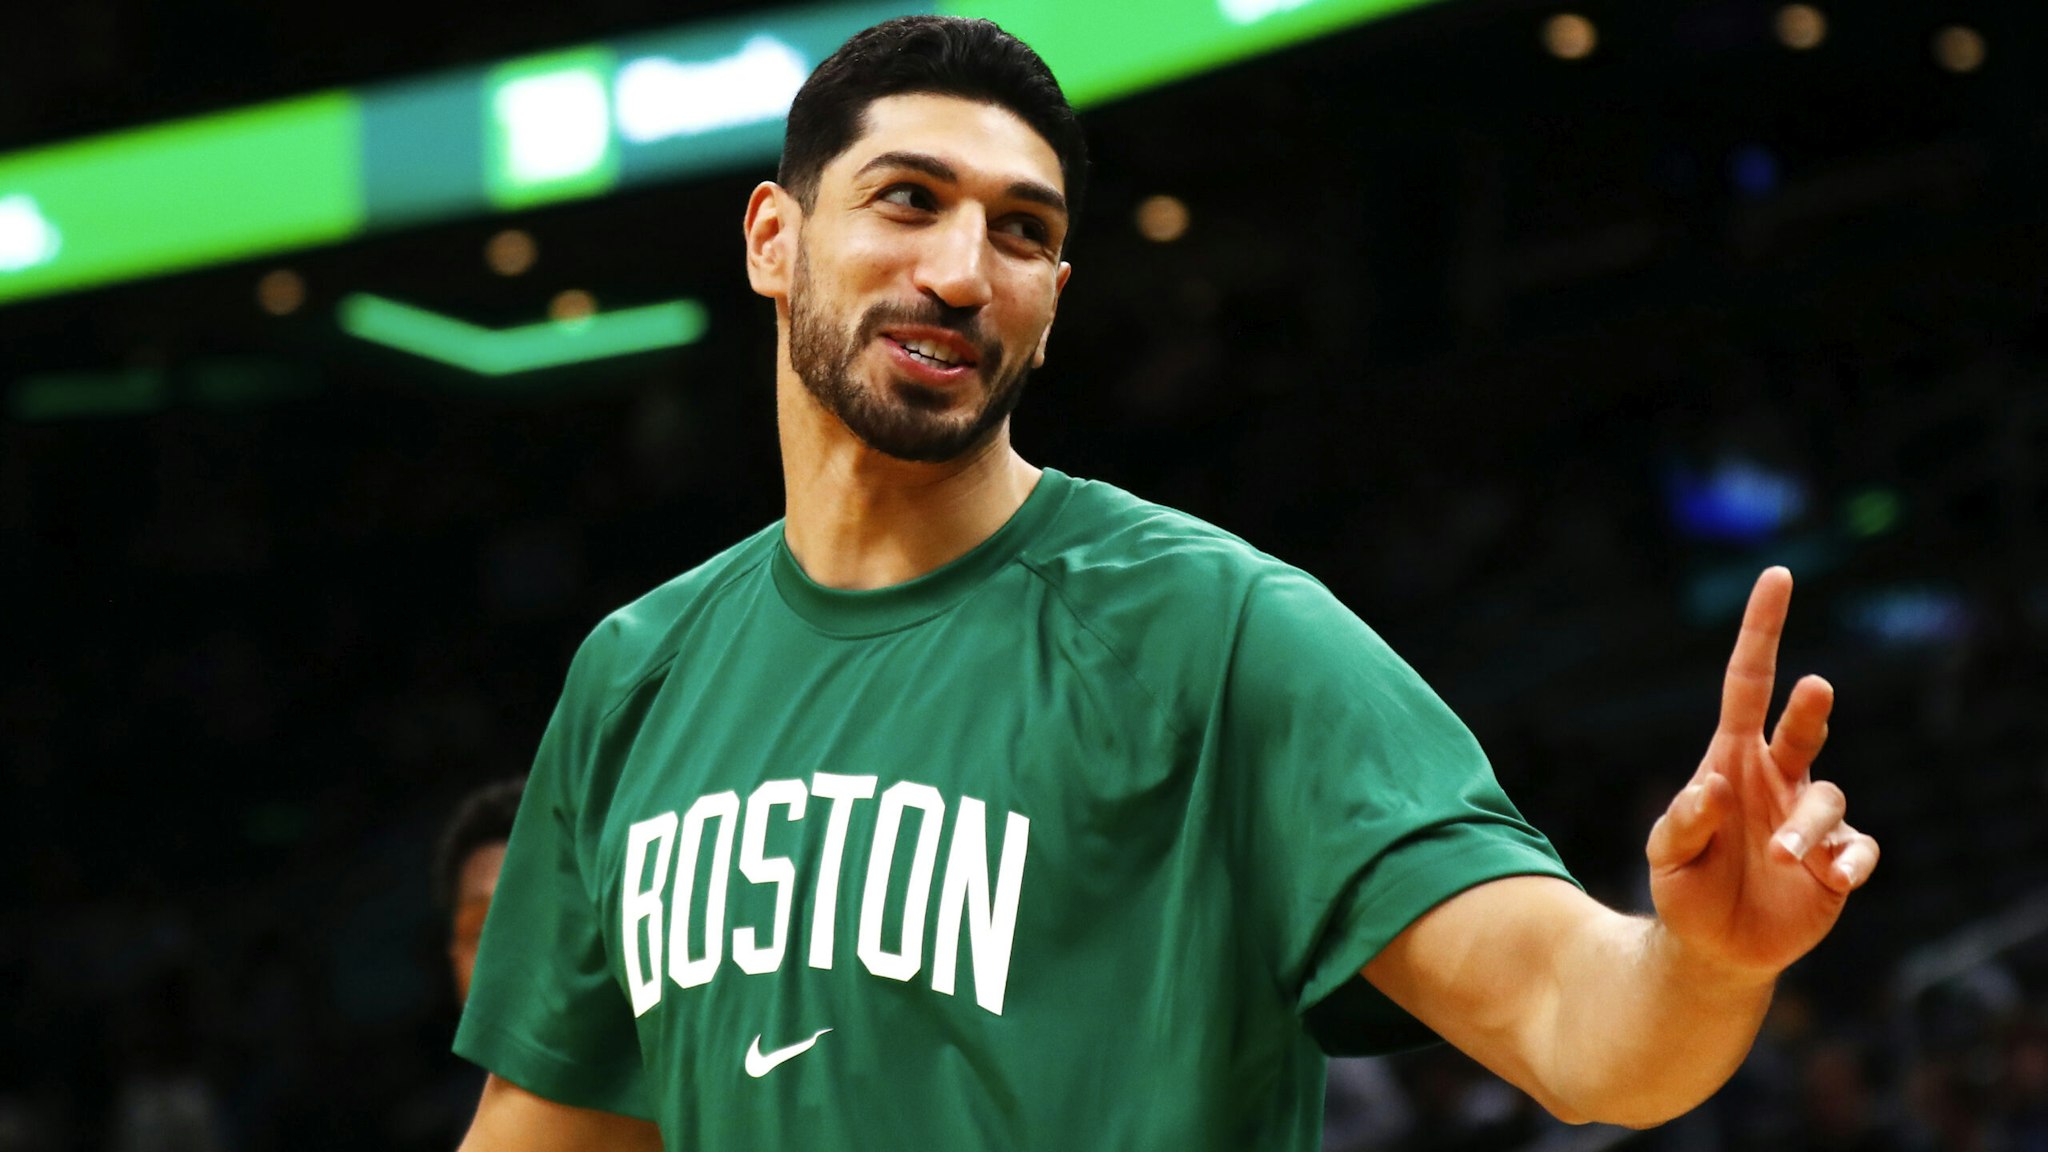 BOSTON, MASSACHUSETTS - OCTOBER 27: Enes Kanter #13 of the Boston Celtics reacts before the game against the Washington Wizards at TD Garden on October 27, 2021 in Boston, Massachusetts. NOTE TO USER: User expressly acknowledges and agrees that, by downloading and or using this photograph, User is consenting to the terms and conditions of the Getty Images License Agreement.